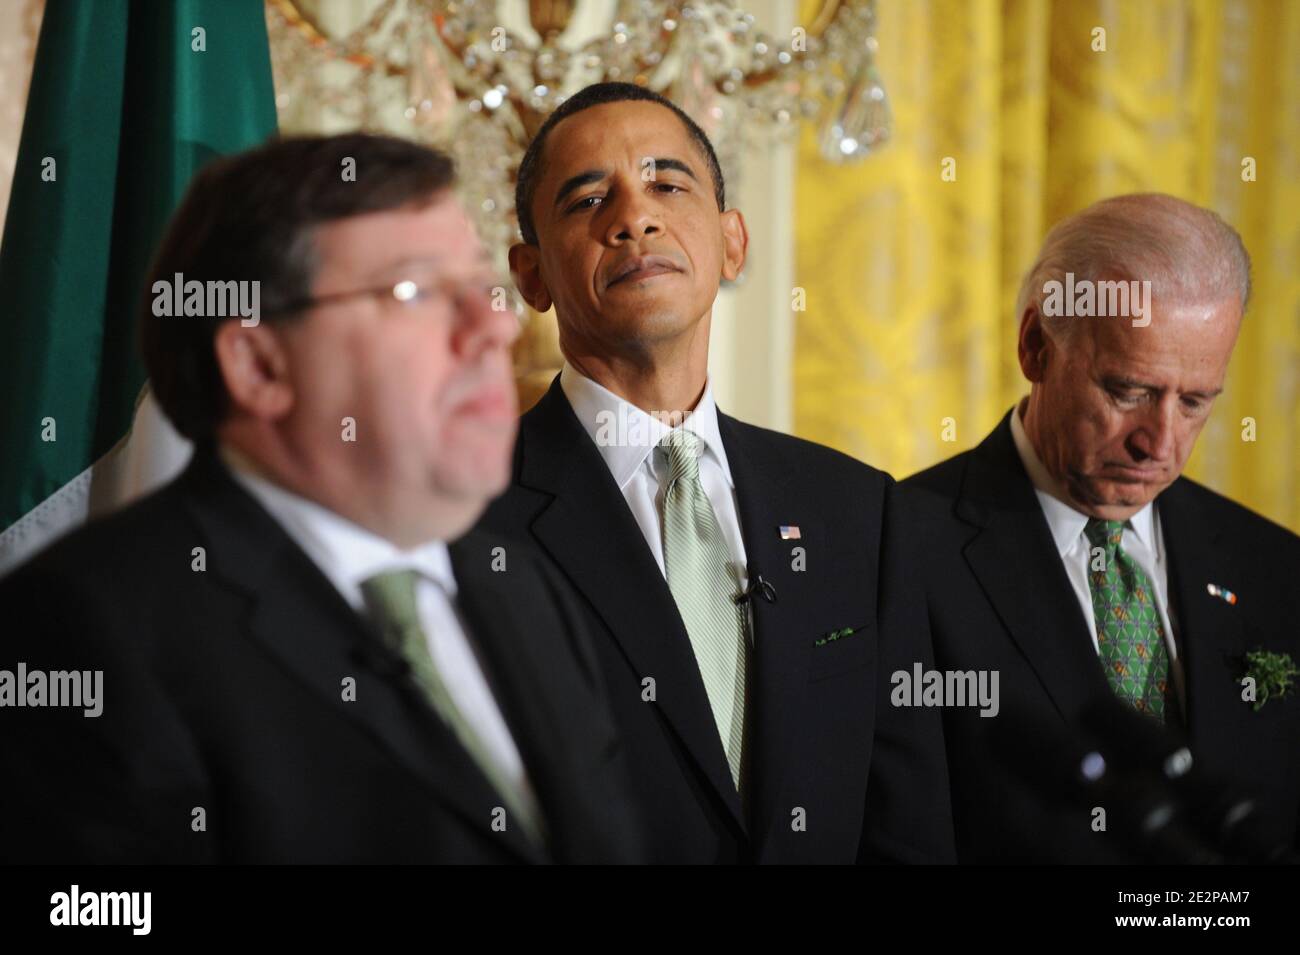 US President Barack Obama (C) and US Vice President Joe Biden (R) listen to Prime Minister (Taoiseach) of Ireland Brian Cowen (L) deliver remarks during the annual St. Patrick's Day Reception in the East Room of the White House, in Washington DC, USA, on March 17, 2010. President Obama and the Prime Minister (Taoiseach) of Ireland Brian Cowen delivered remarks and participated in a traditional Shamrock ceremony. Photo by Michael Reynolds/Pool/ABACAPRESS.COM Stock Photo